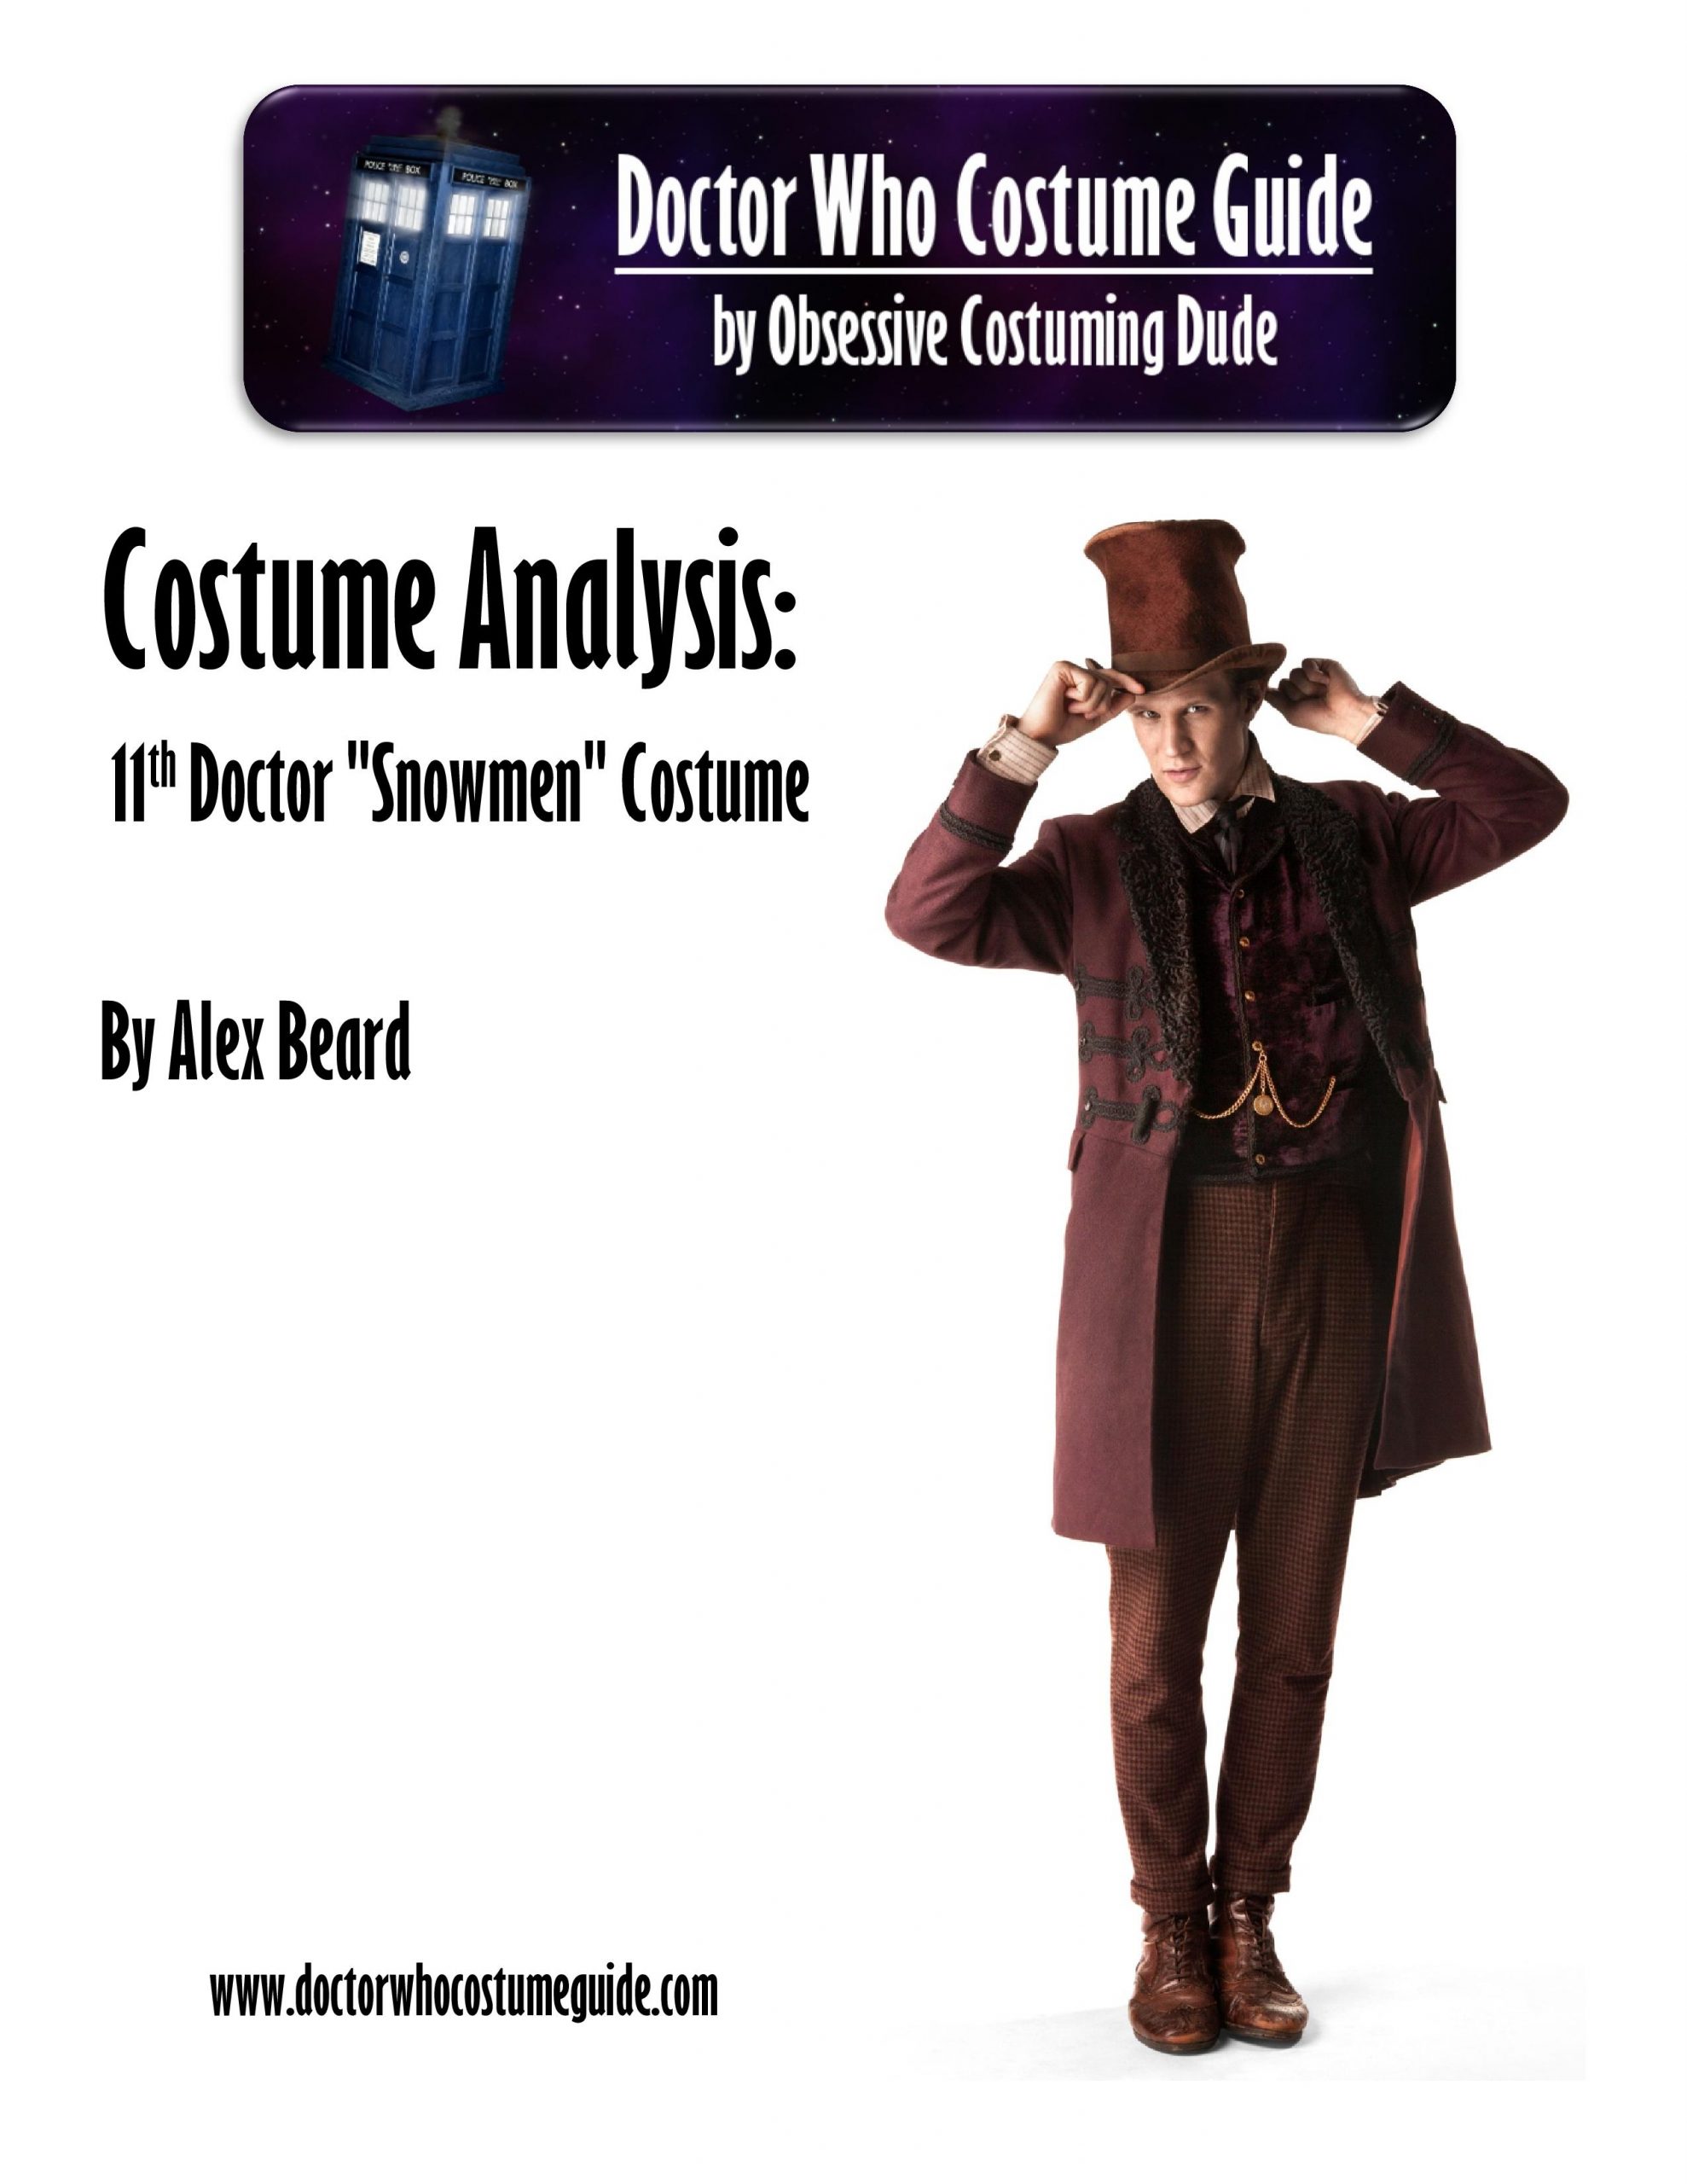 11th Doctor "Snowmen" costume analysis - Doctor Who Costume Guide